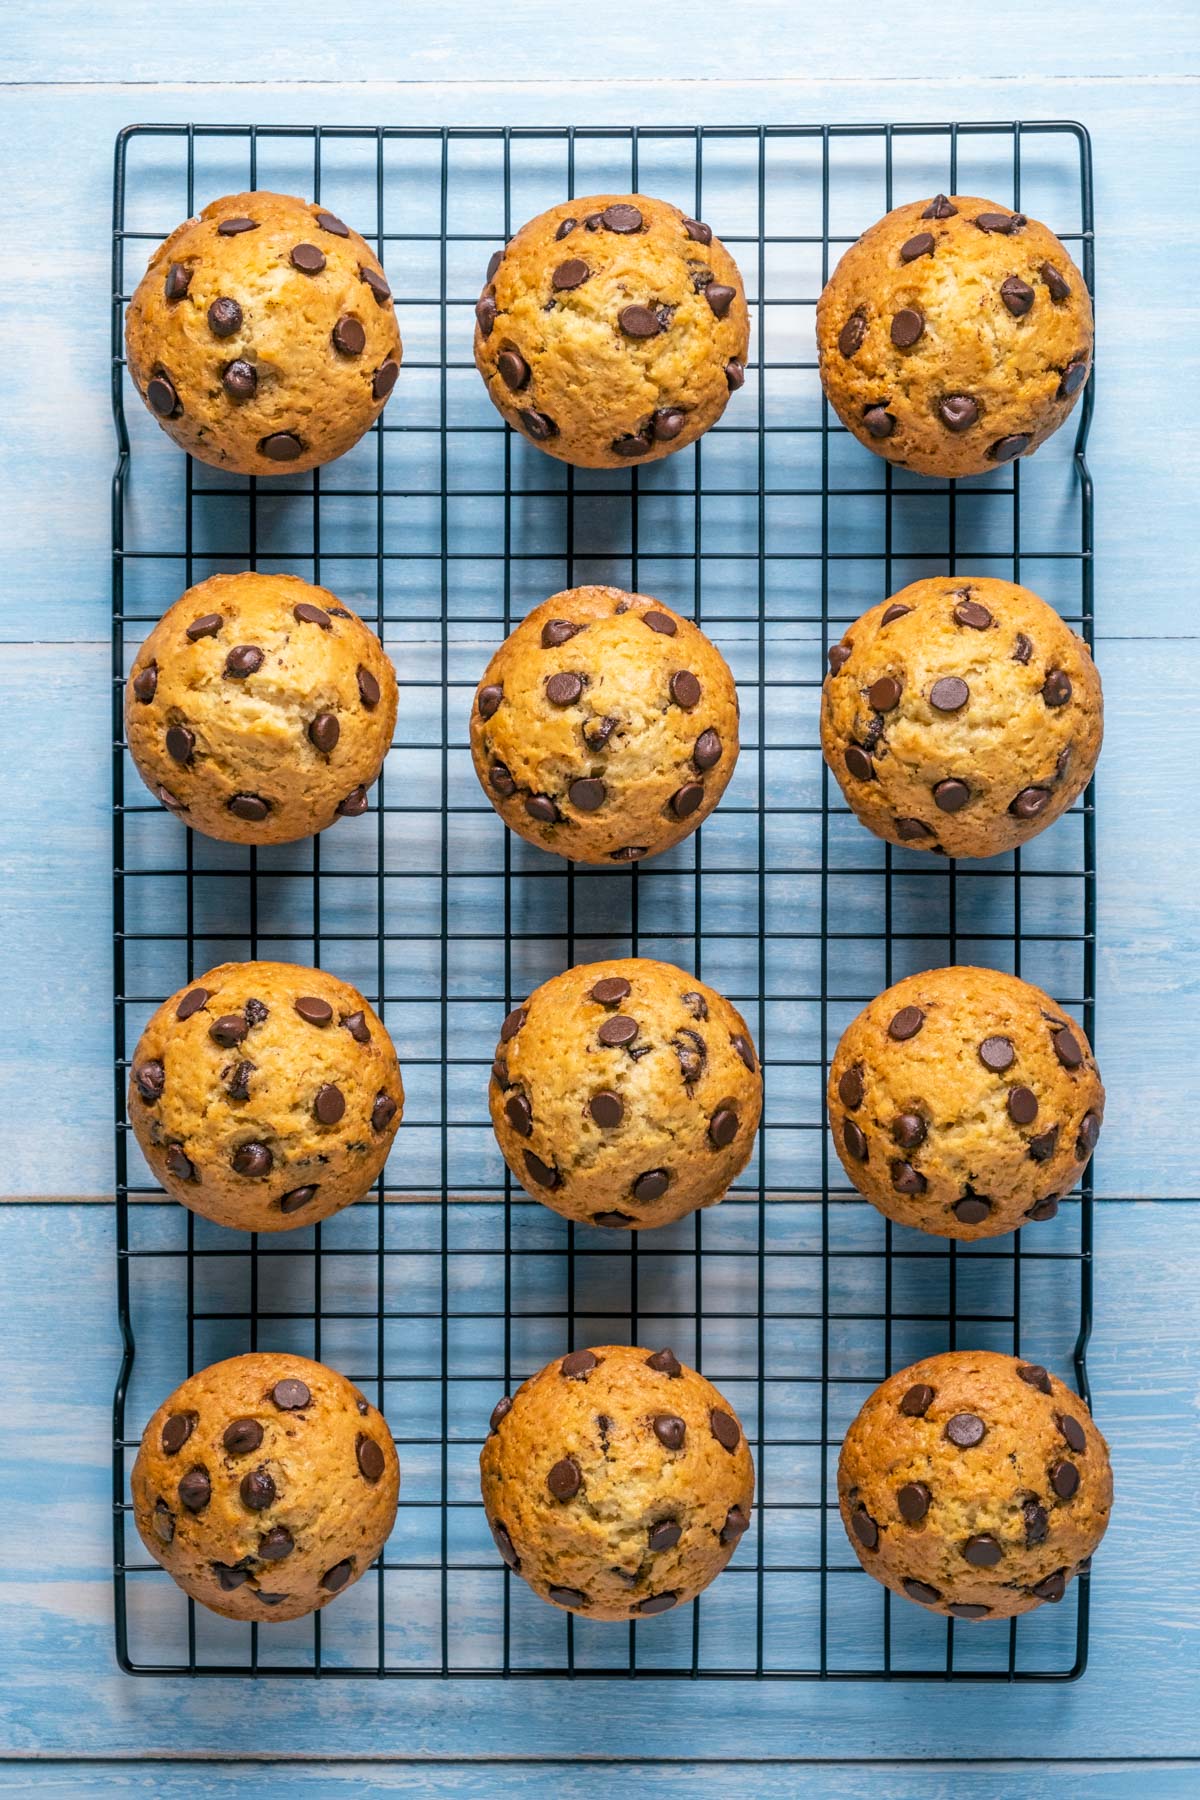 Vegan chocolate chip muffins cooling on a wire cooling rack.